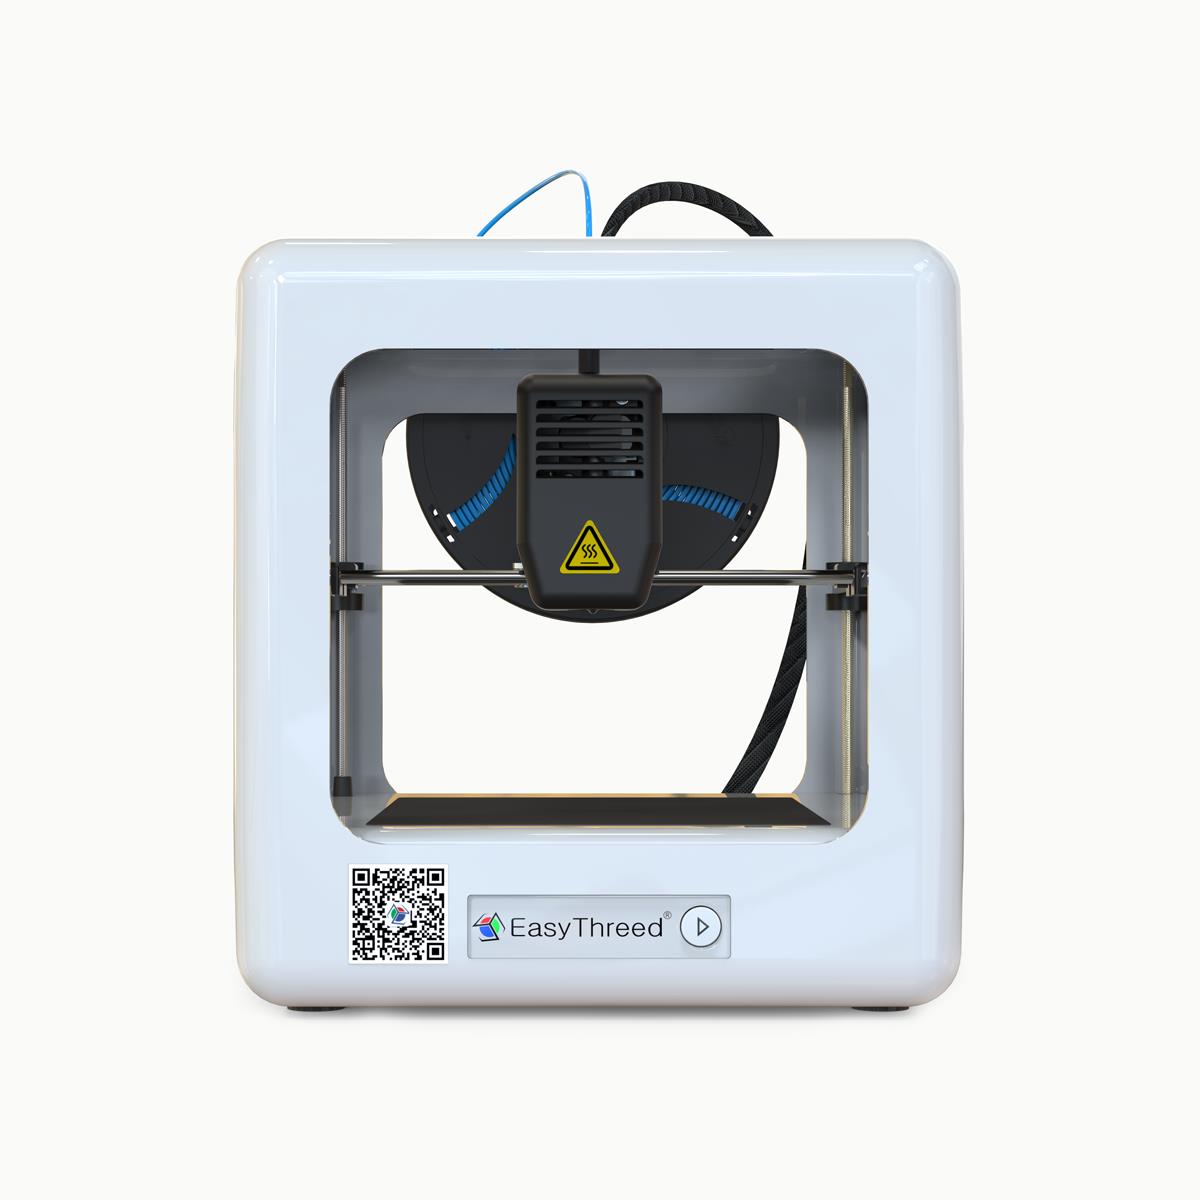 Easythreed® NANO Fully Assembled Mini 3D Printer for Household Education & Students 90*110*110mm Printing Size Support One Key Printing with CE Certificate 12